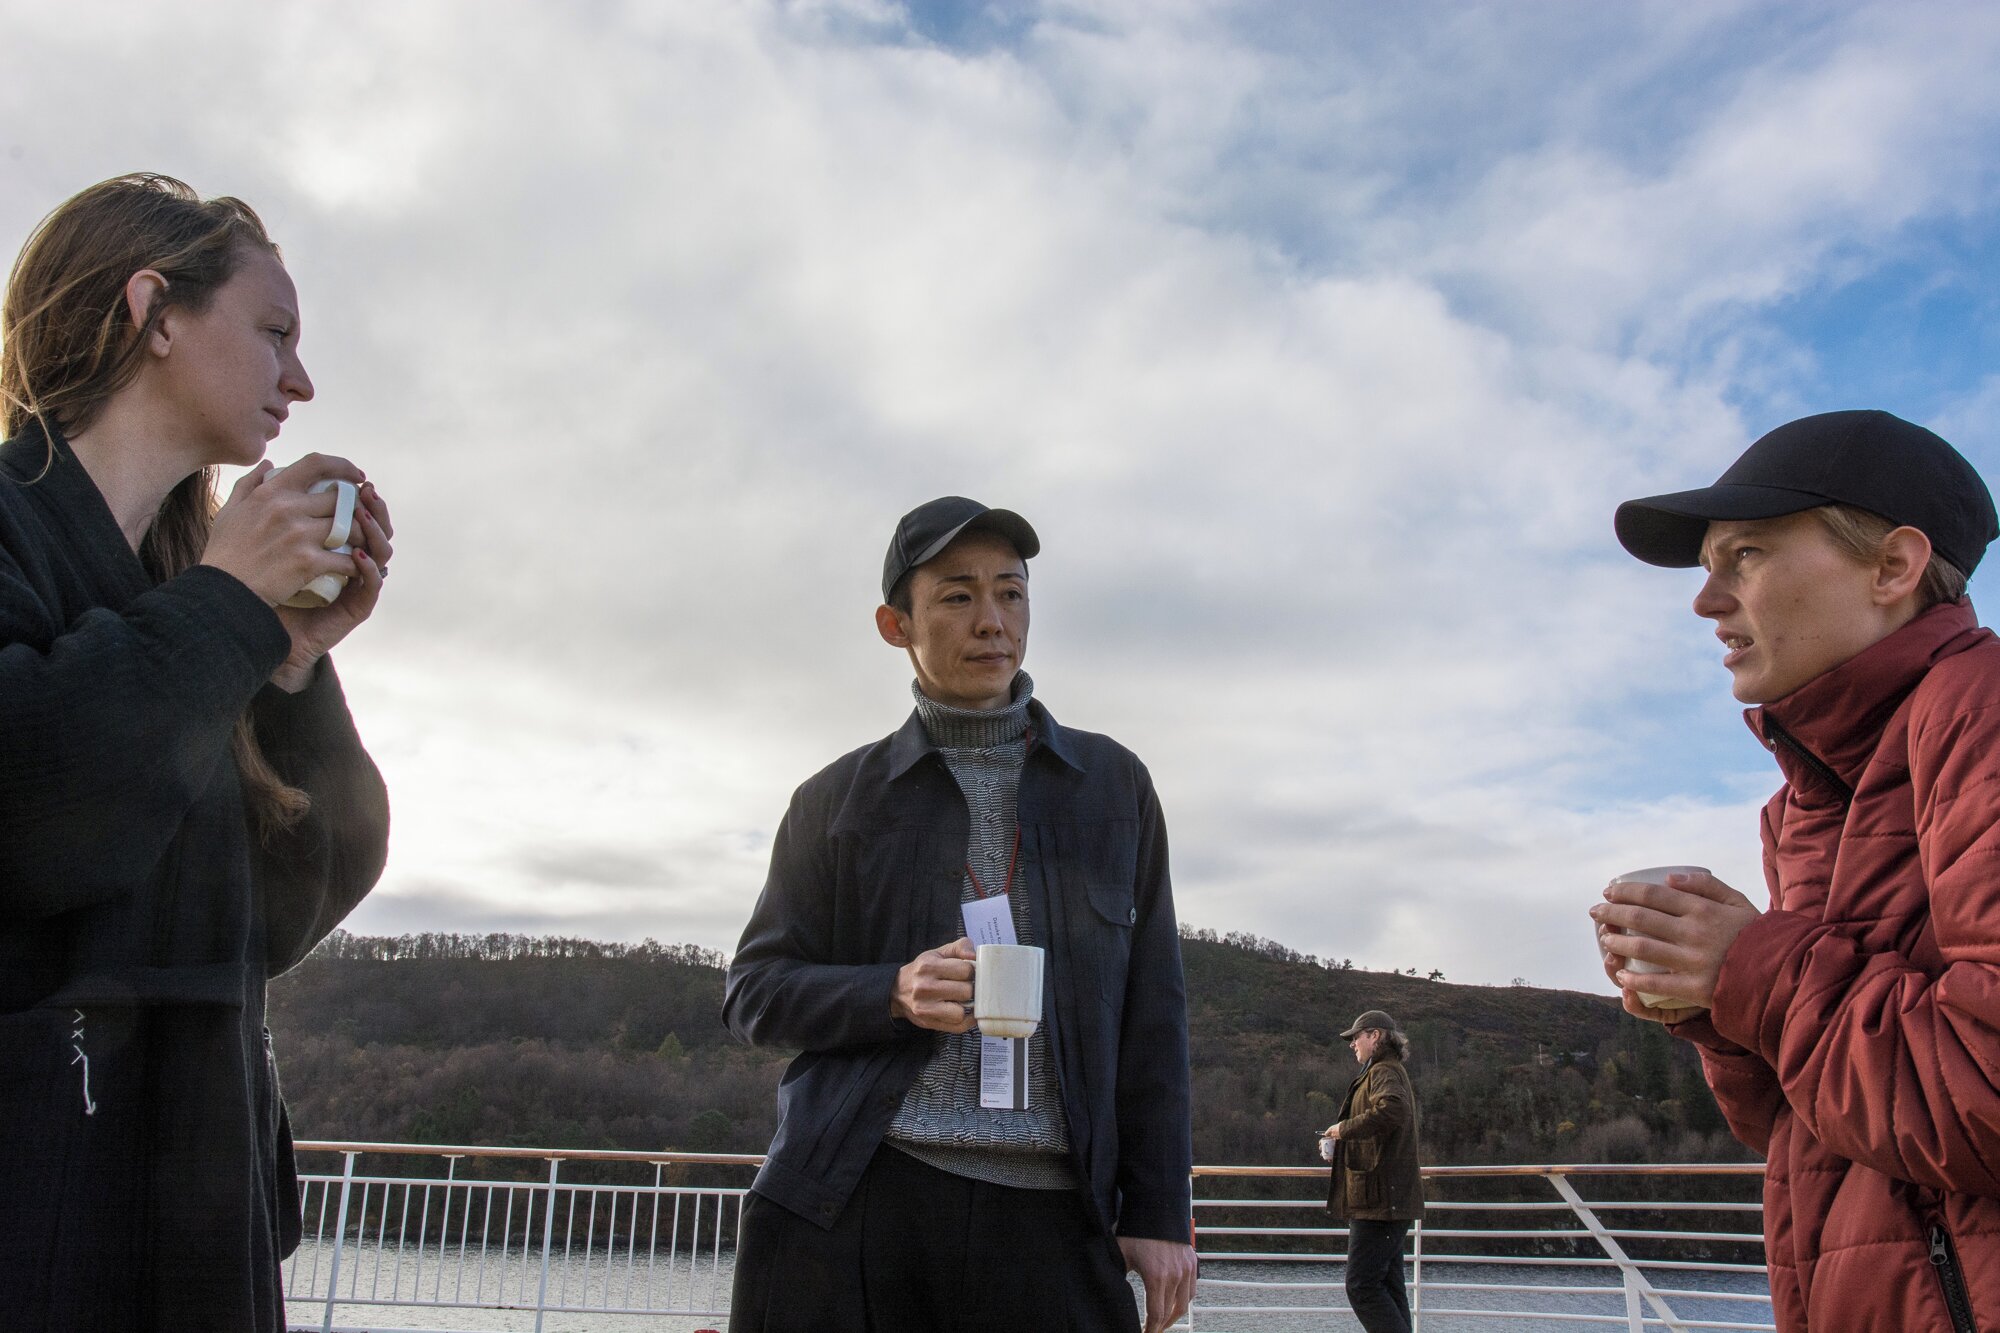 Mary Grace Wright, director of the gallery STANDARD with artists Daisuke Kosugi and Ina Hagen sailing towards Bergen harbor, 2018. Photo: Laimonas Puisys.